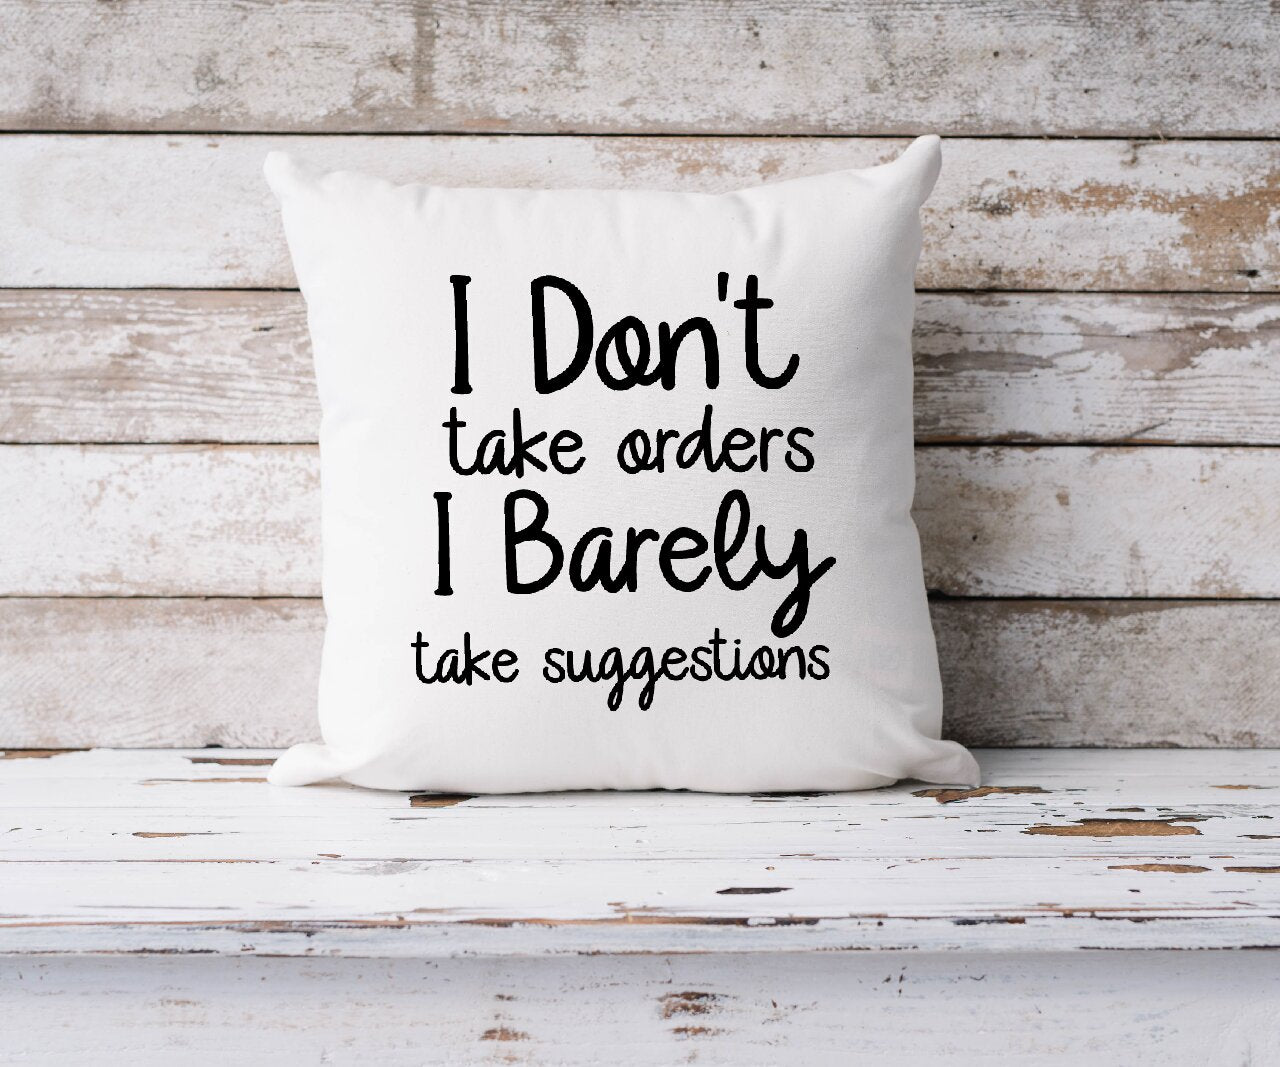 I Don't Take Orders, I Barely Take Suggestions - Cushion Cover